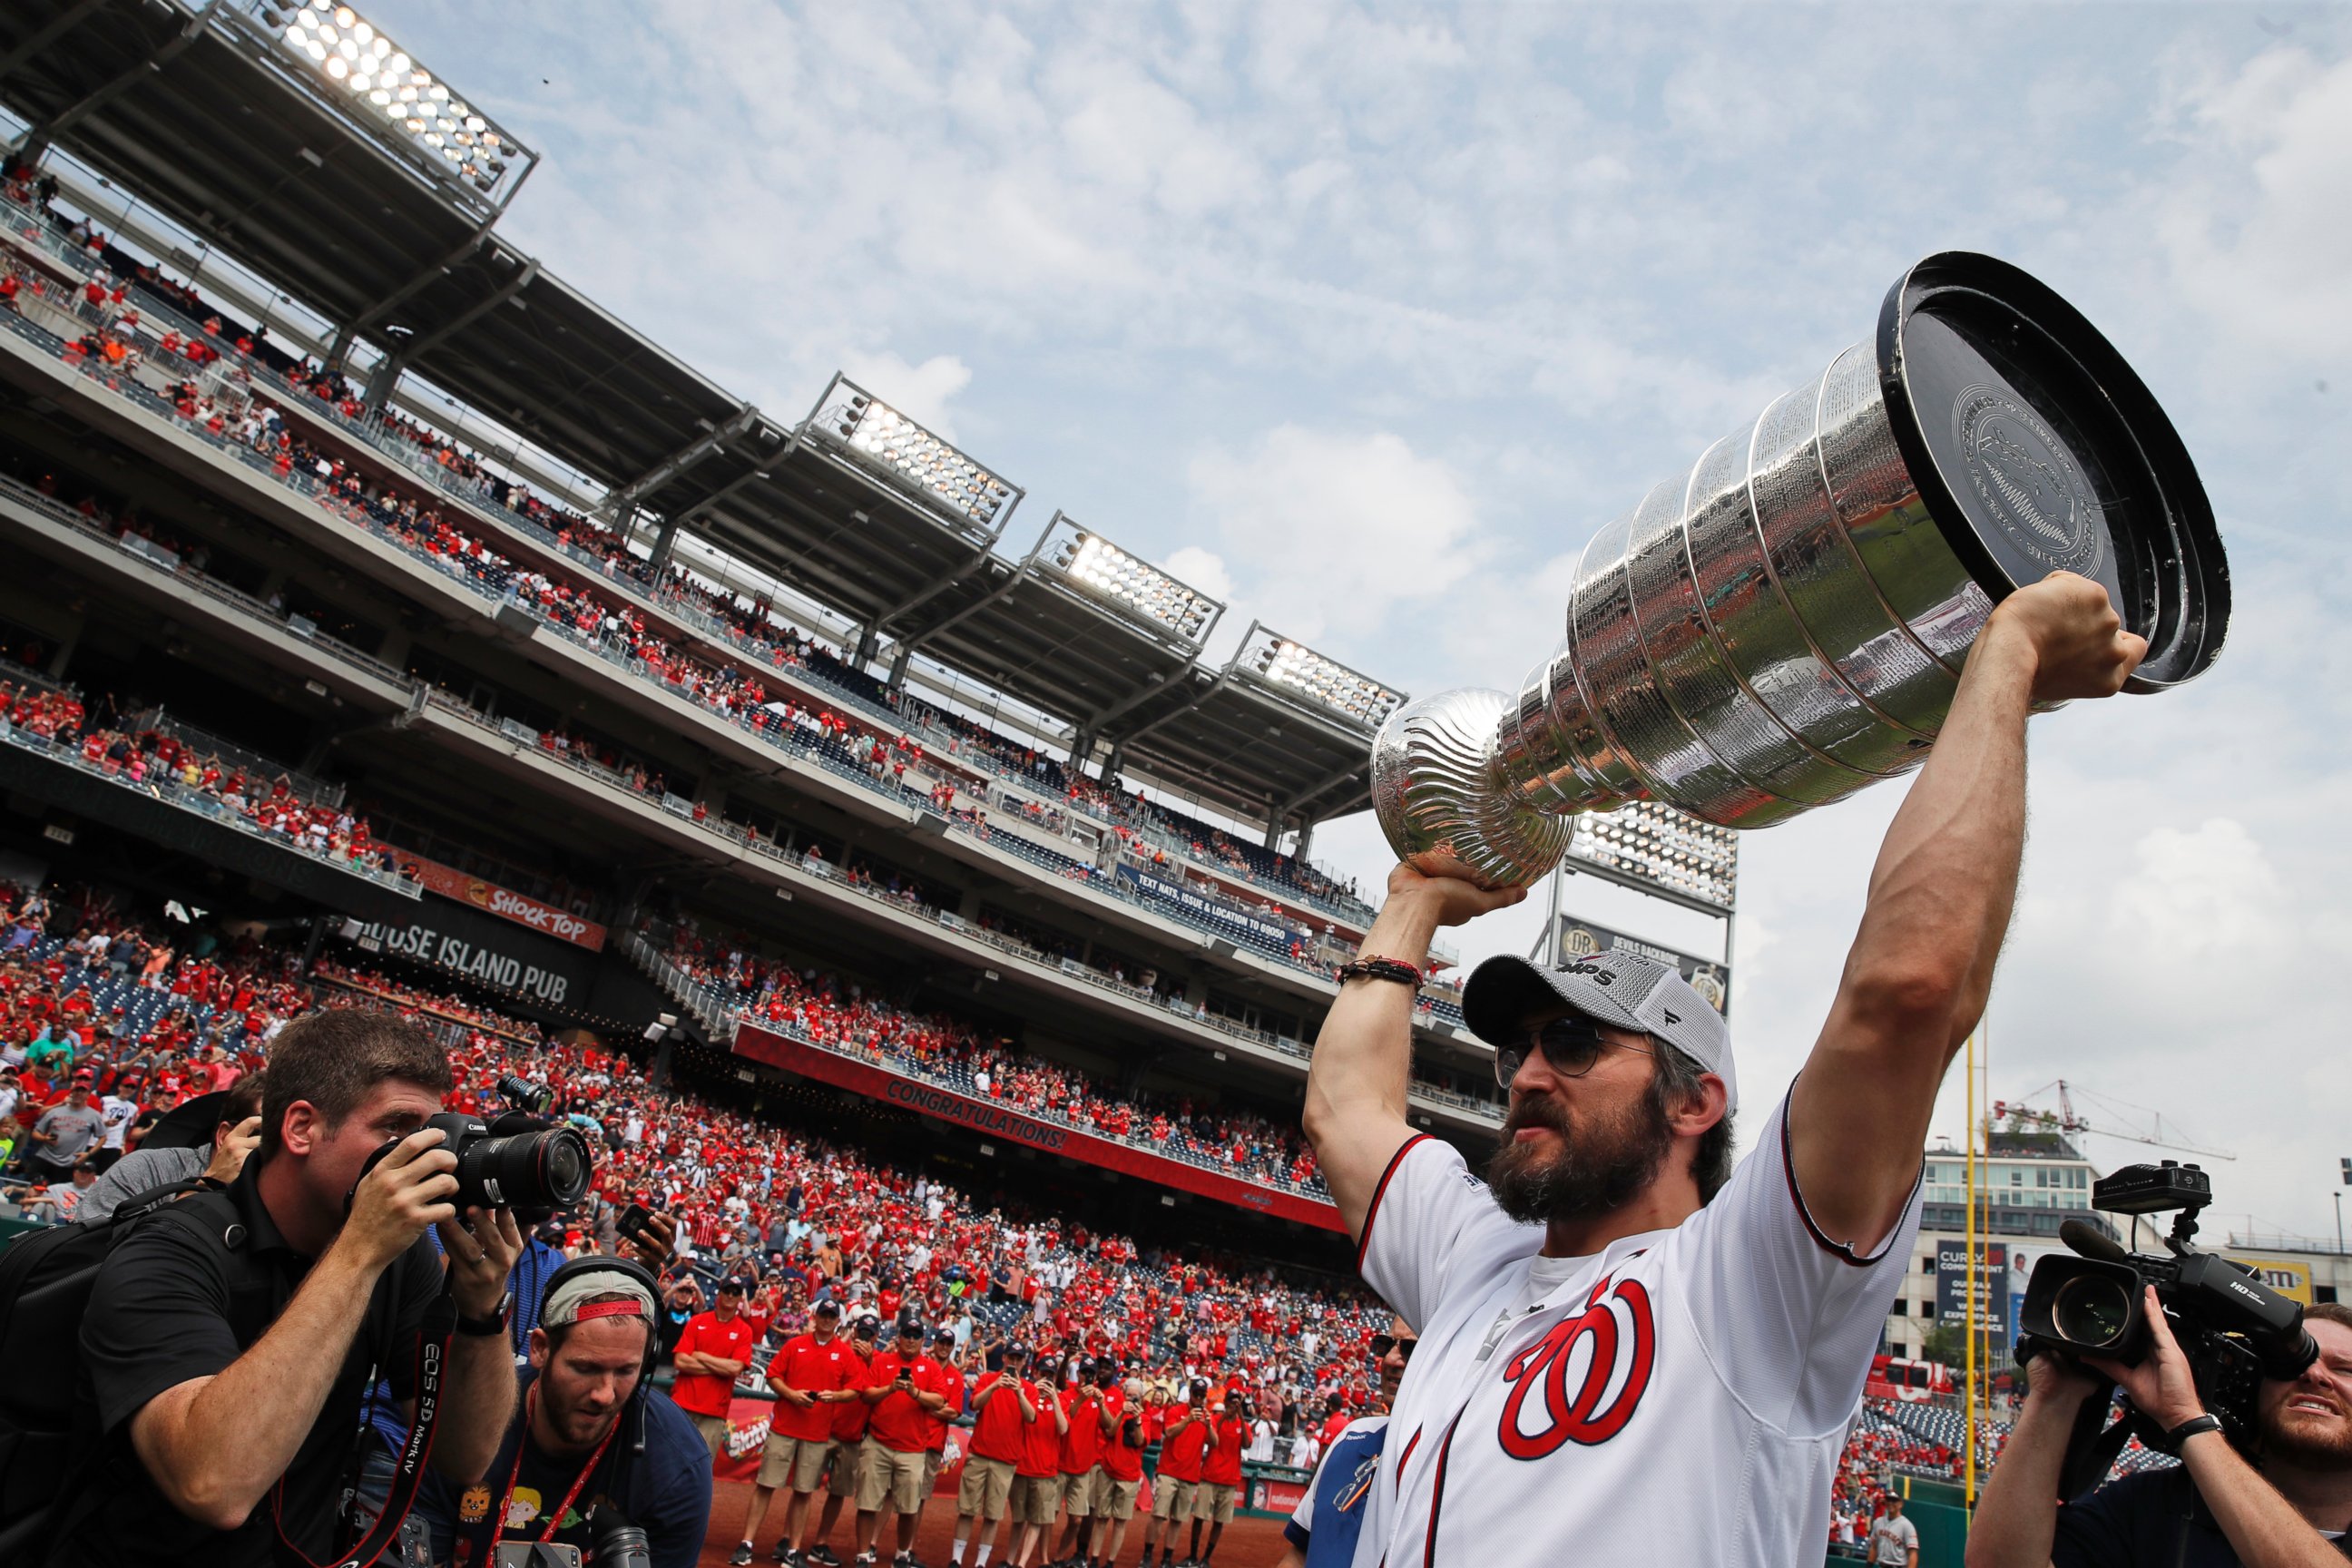 Washington Capitals' Alex Ovechkin, from Russia, lifts the Stanley Cup on the field before a baseball game between the Washington Nationals and the San Francisco Giants at Nationals Park, Saturday, June 9, 2018, in Washington.